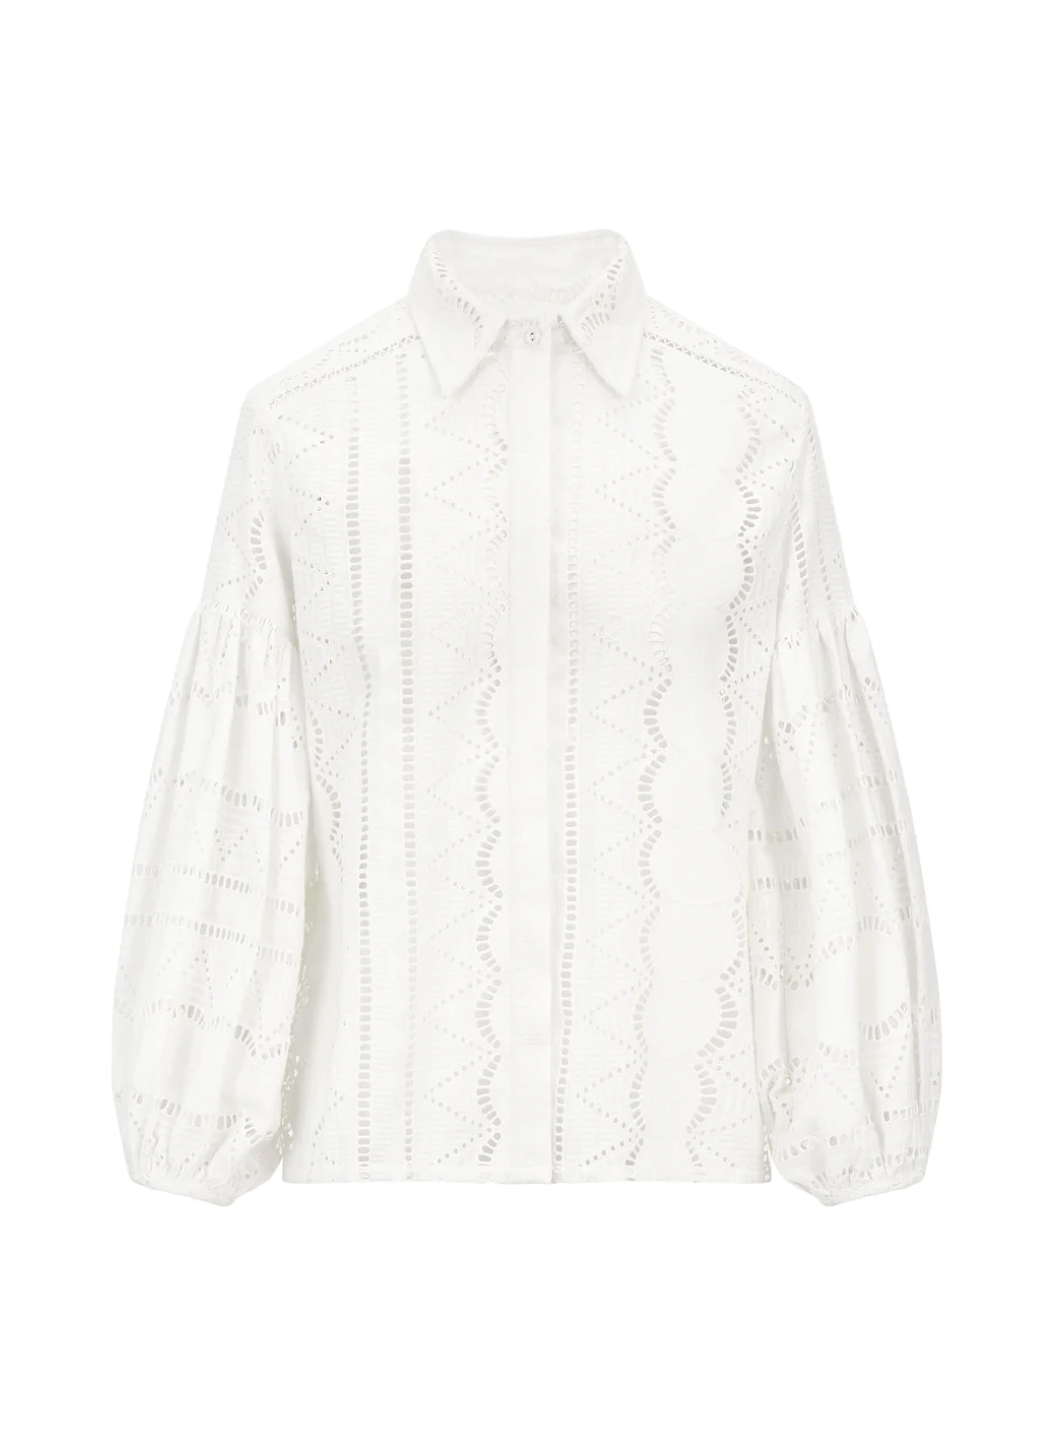 Nora Shirt in Cotton Embroidery Soft White